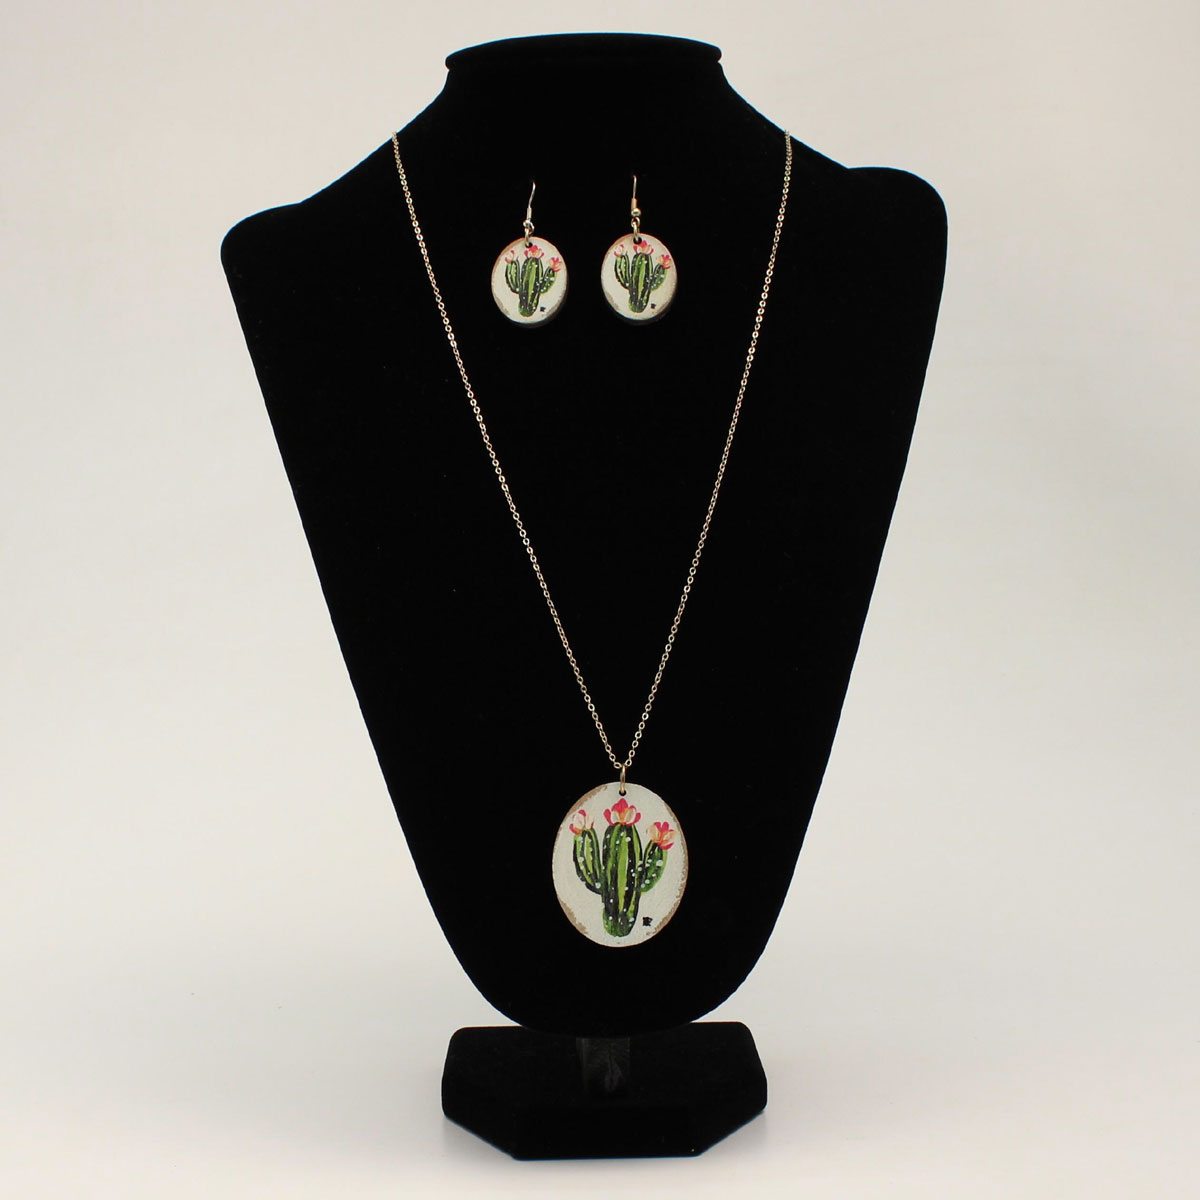 Silver Strike Necklace & Earrings Set - Cactus Flower Round